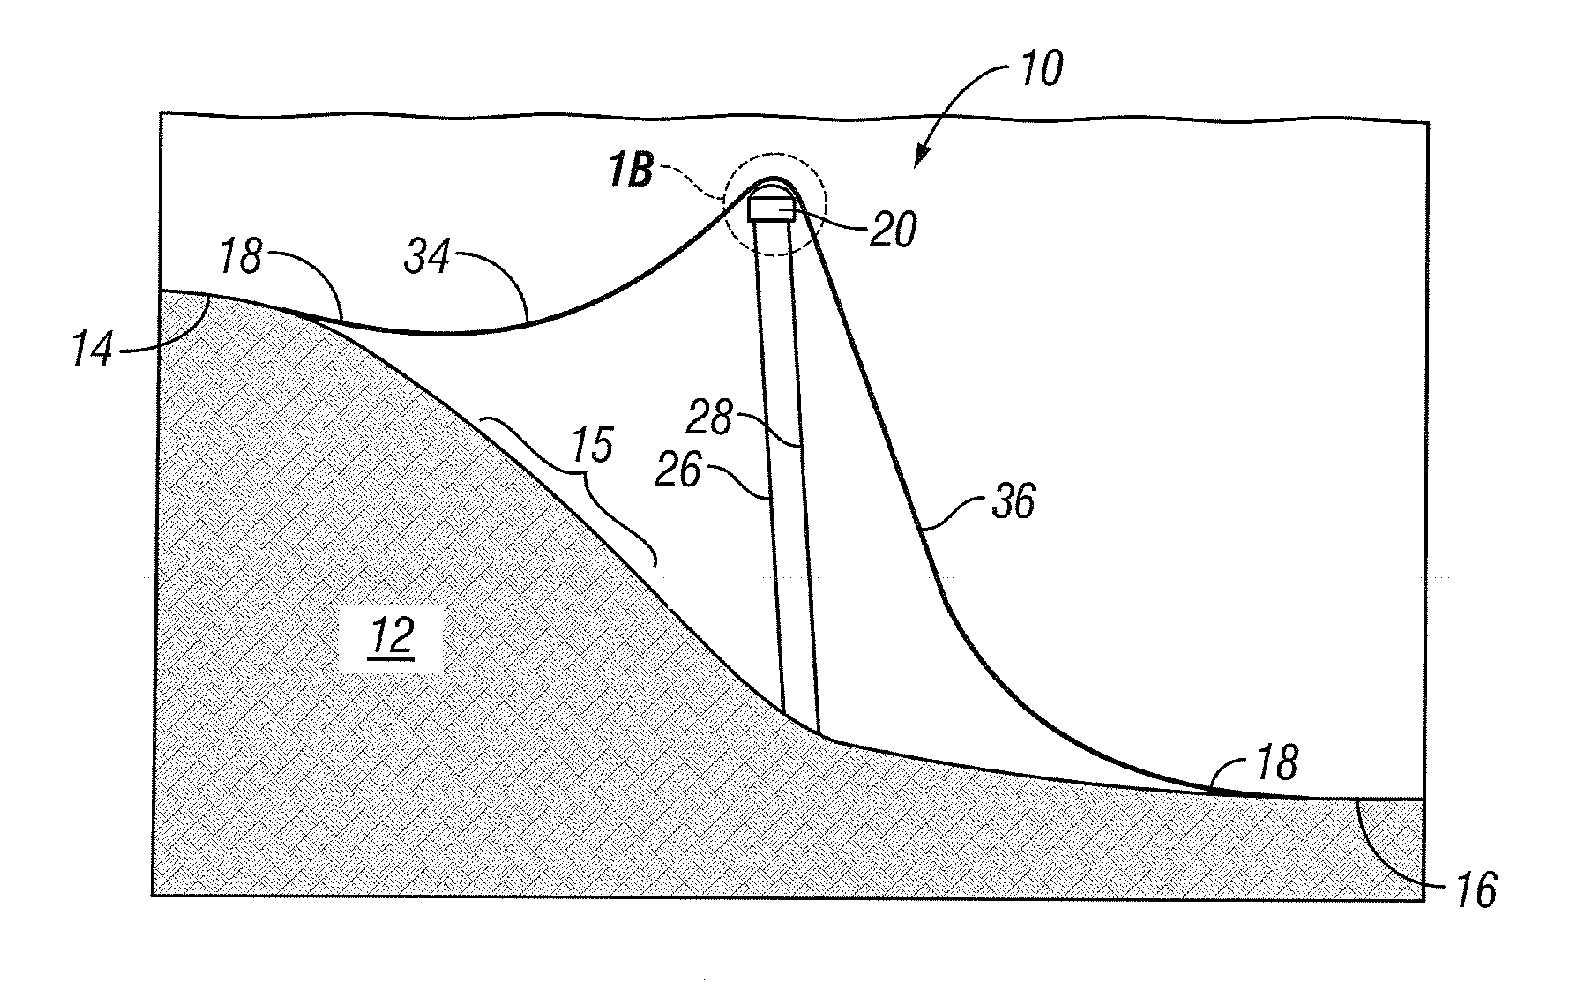 Concentrated buoyancy subsea pipeline apparatus and method